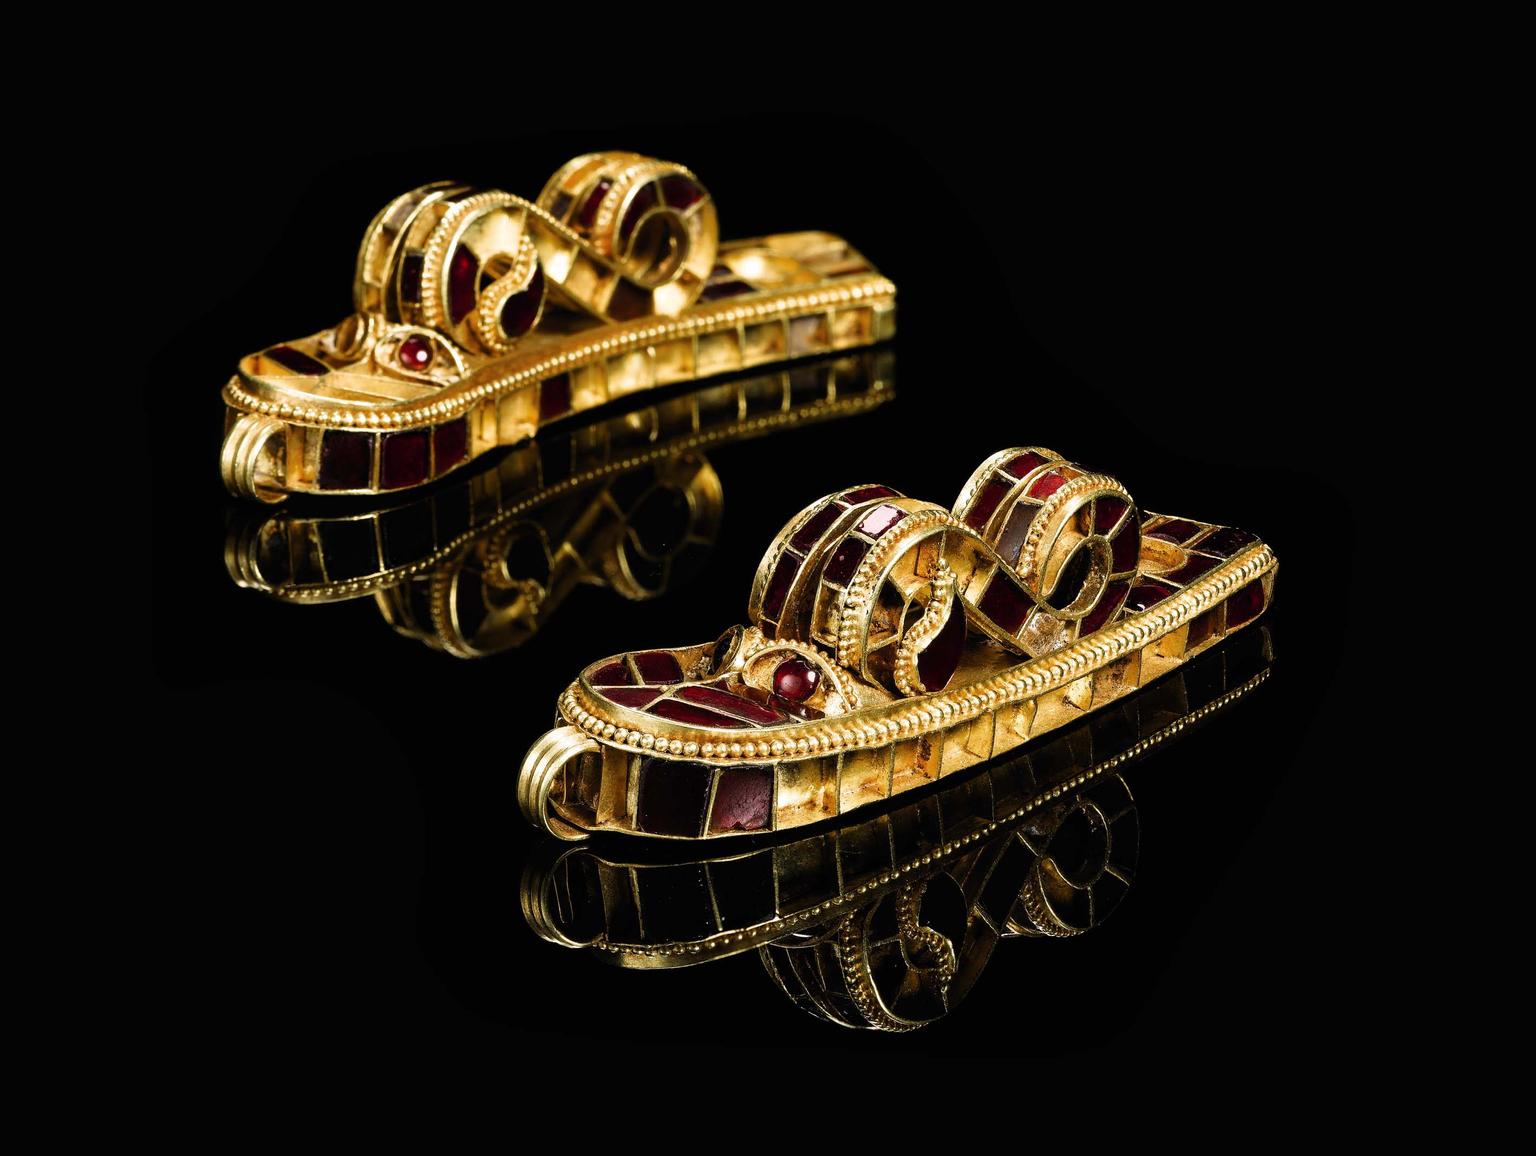 Particularly impressive are the garnet-set cloisonné dragon terminals at each end of the woven gold strap. The design is typical of the Hunnic period, when craftsmen were easily able to access high quality pre-cut garnet stones.